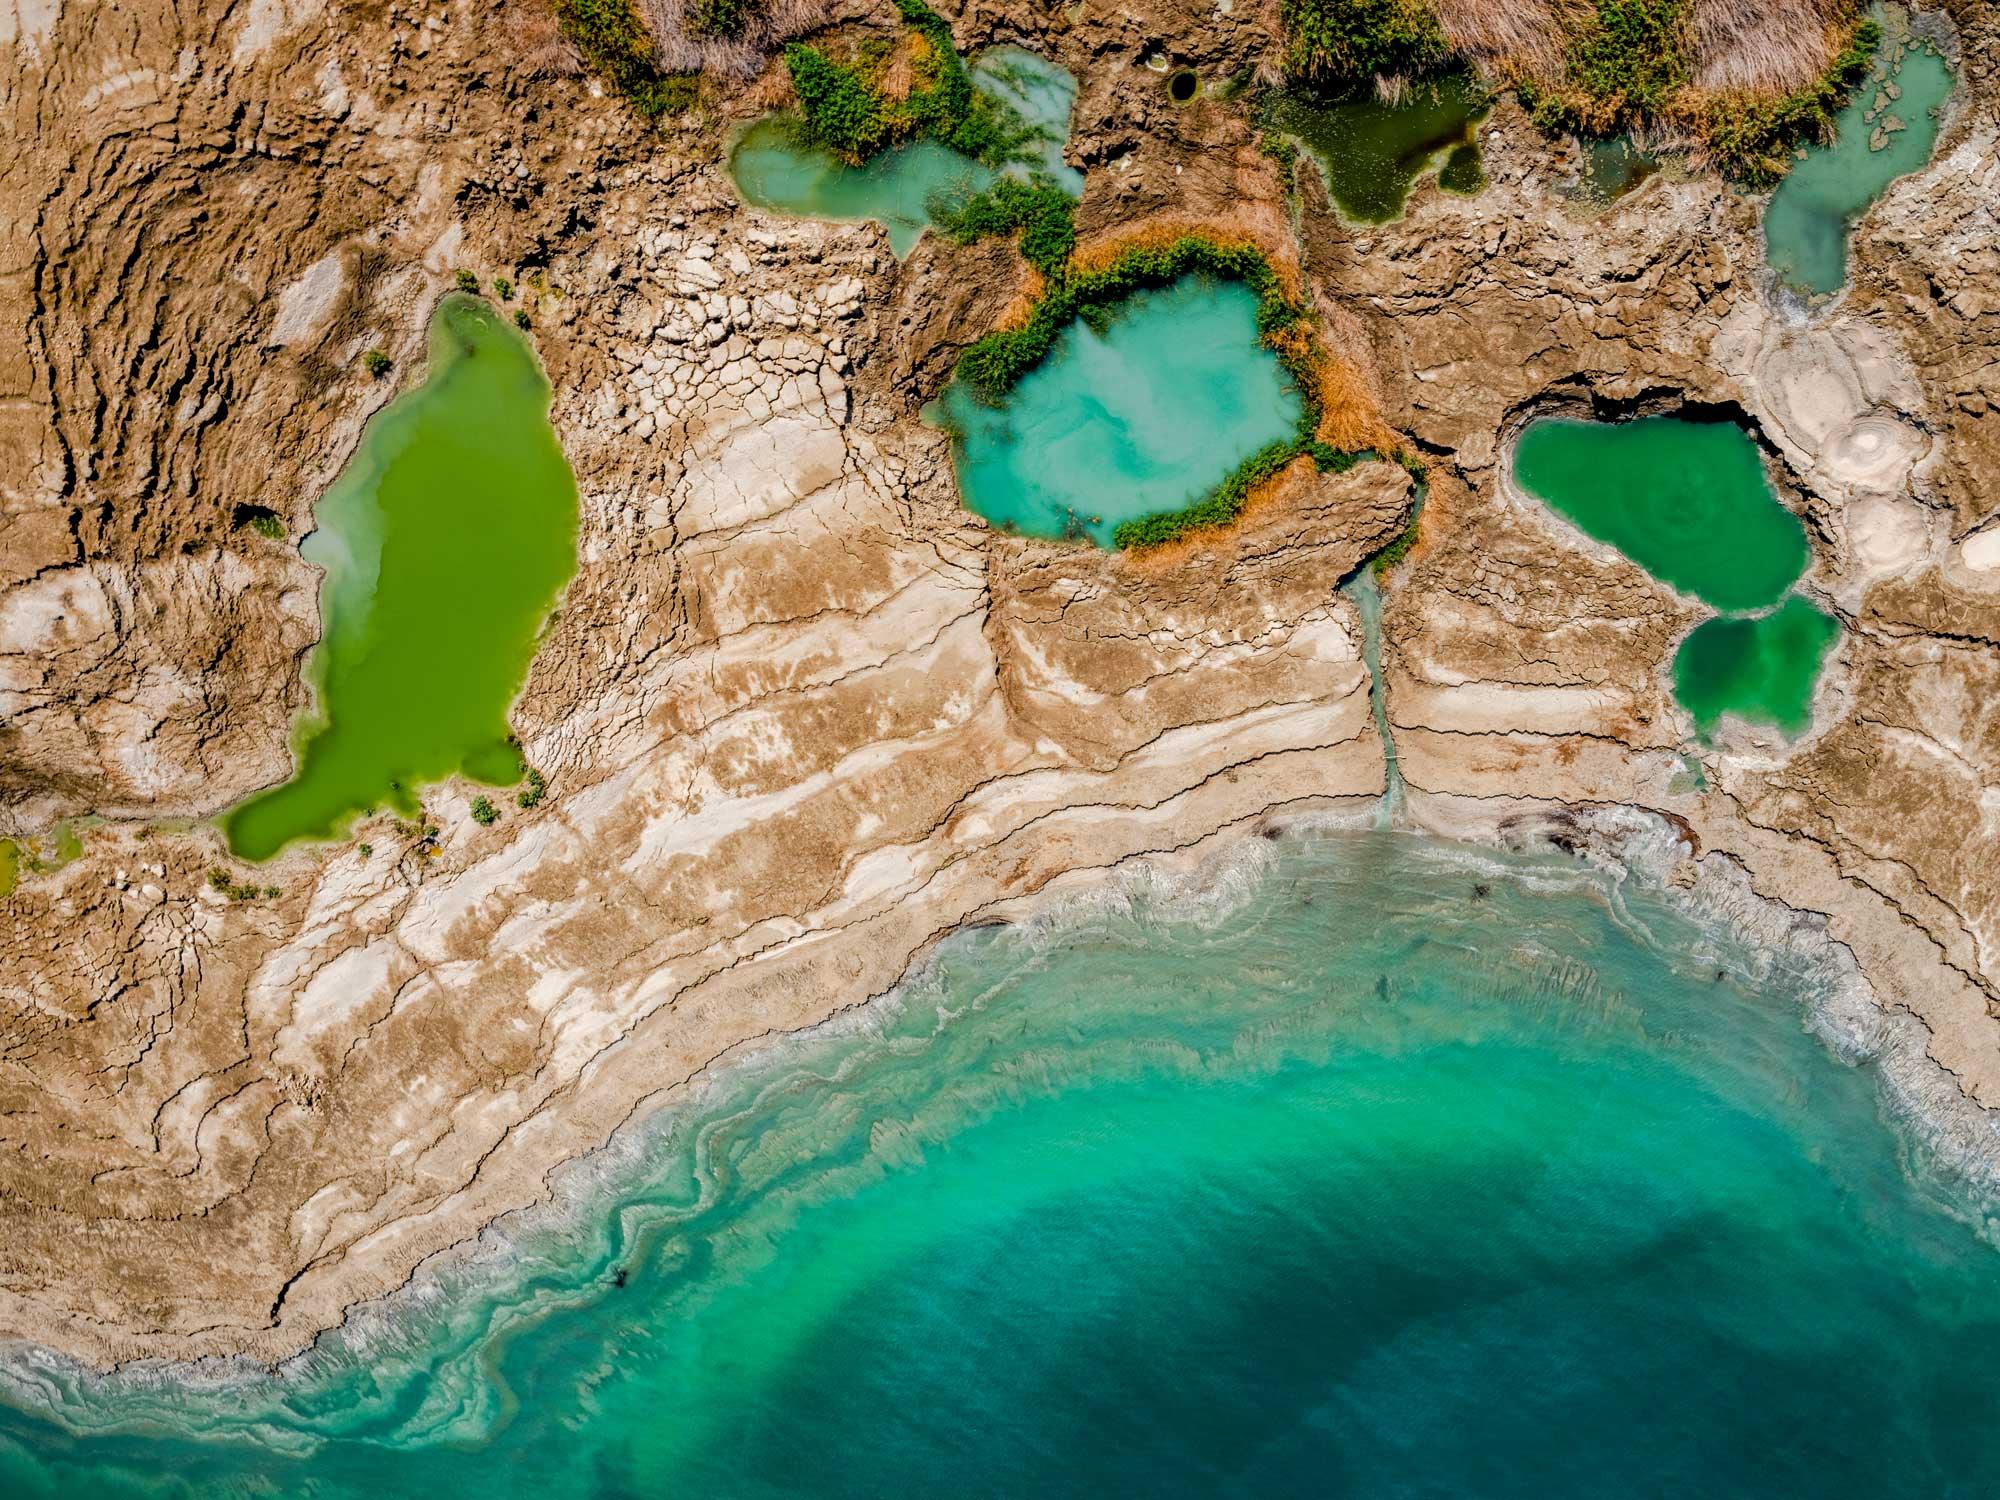 Pools of Life - Dead Sea, Israel - Framed - Photograph by Dinesh Boaz